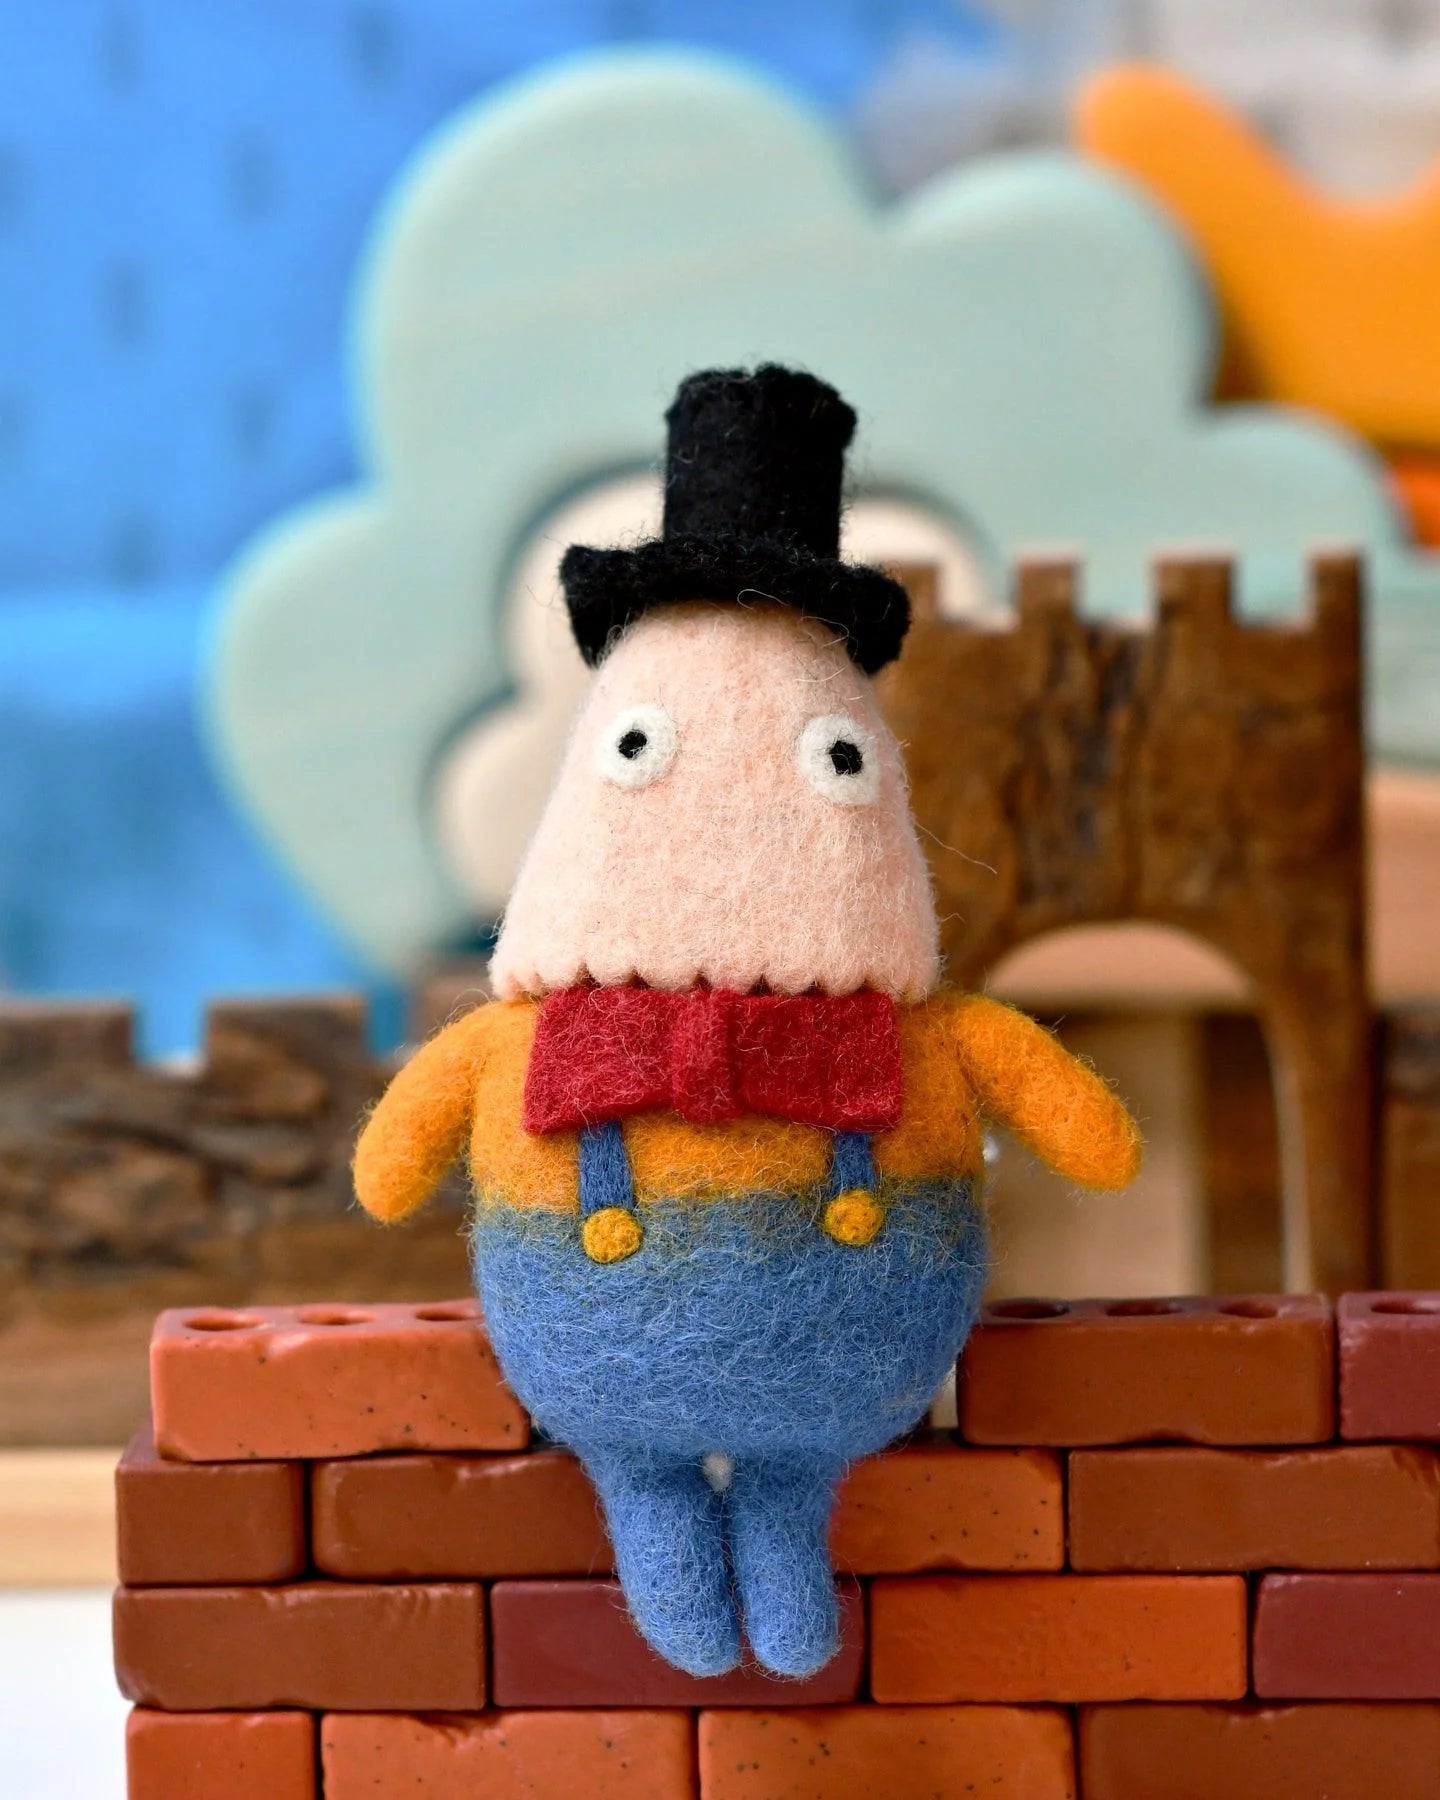 TARA TREASURES | FELT HUMPTY DUMPTY MARIONETTE PUPPET TOY *PRE-ORDER* by TARA TREASURES - The Playful Collective